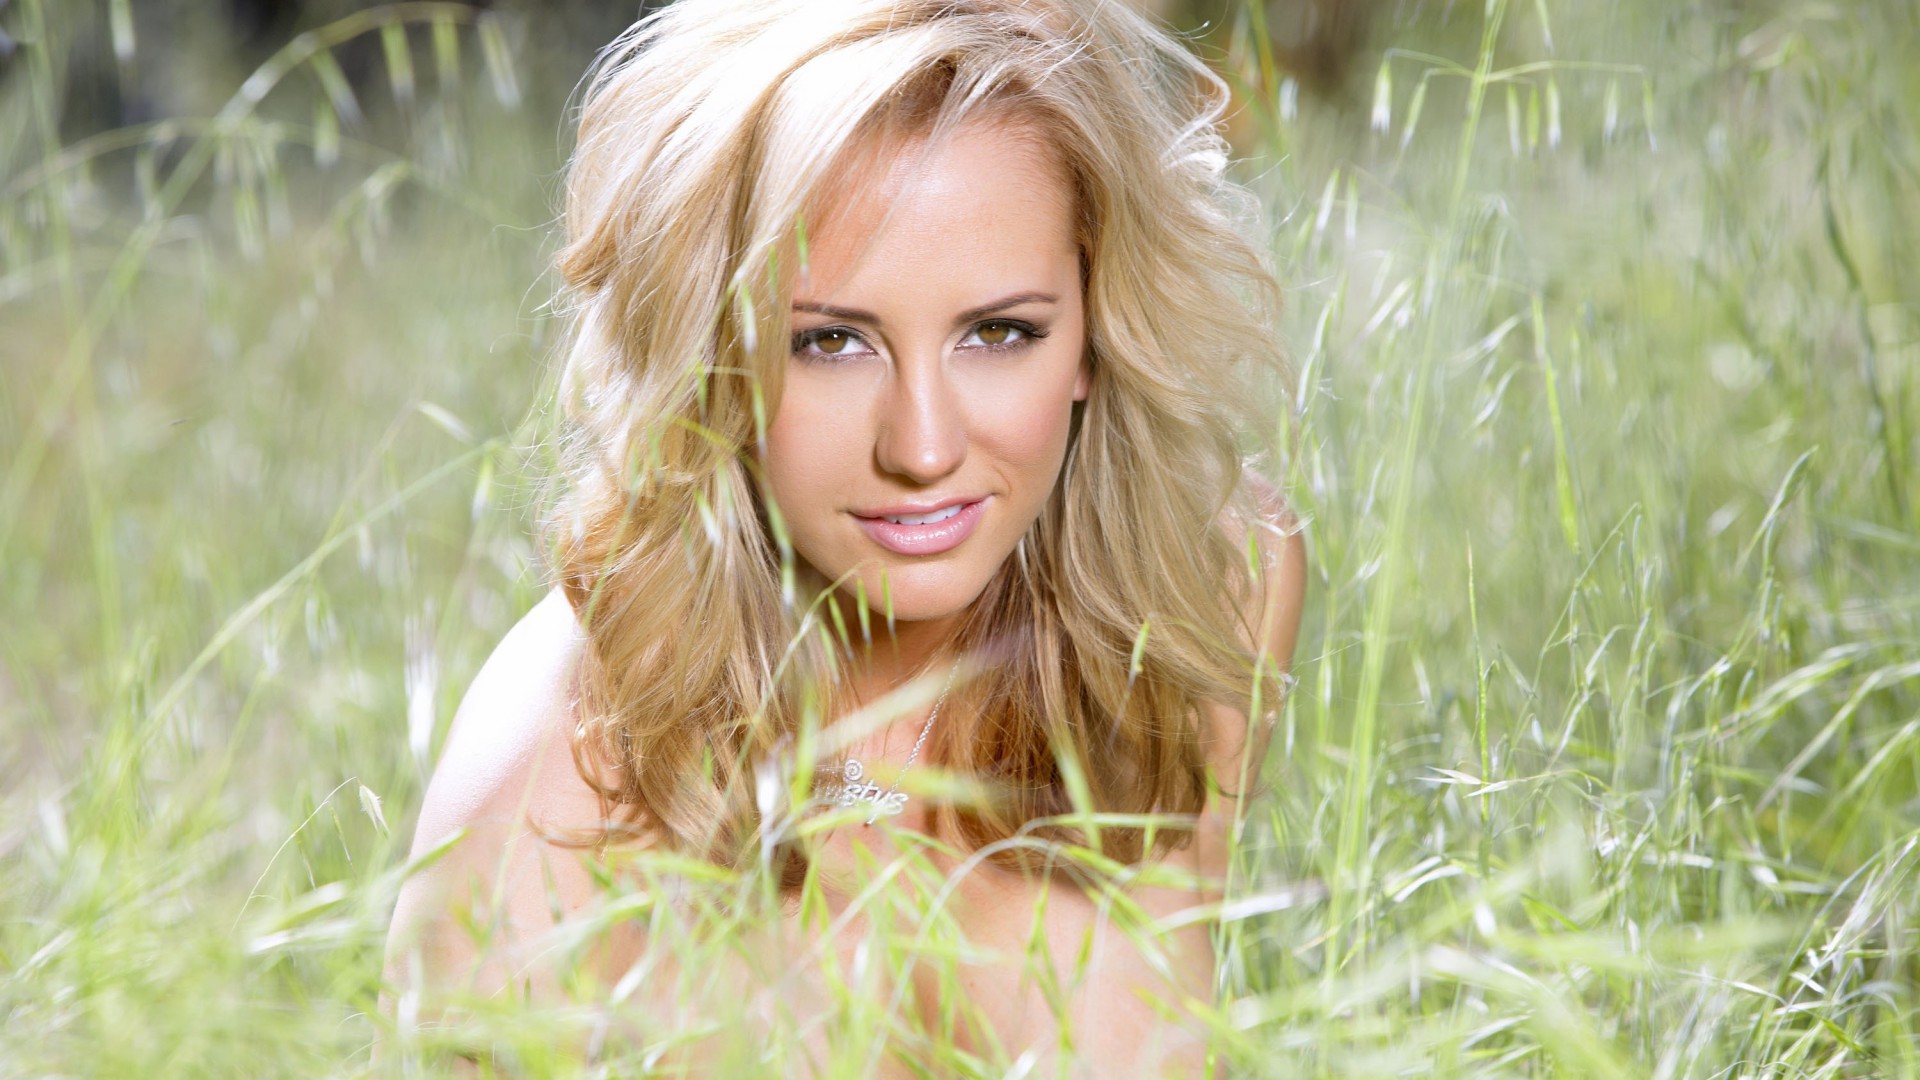 Brett Rossi Wallpapers Images Photos Pictures Backgrounds 8492